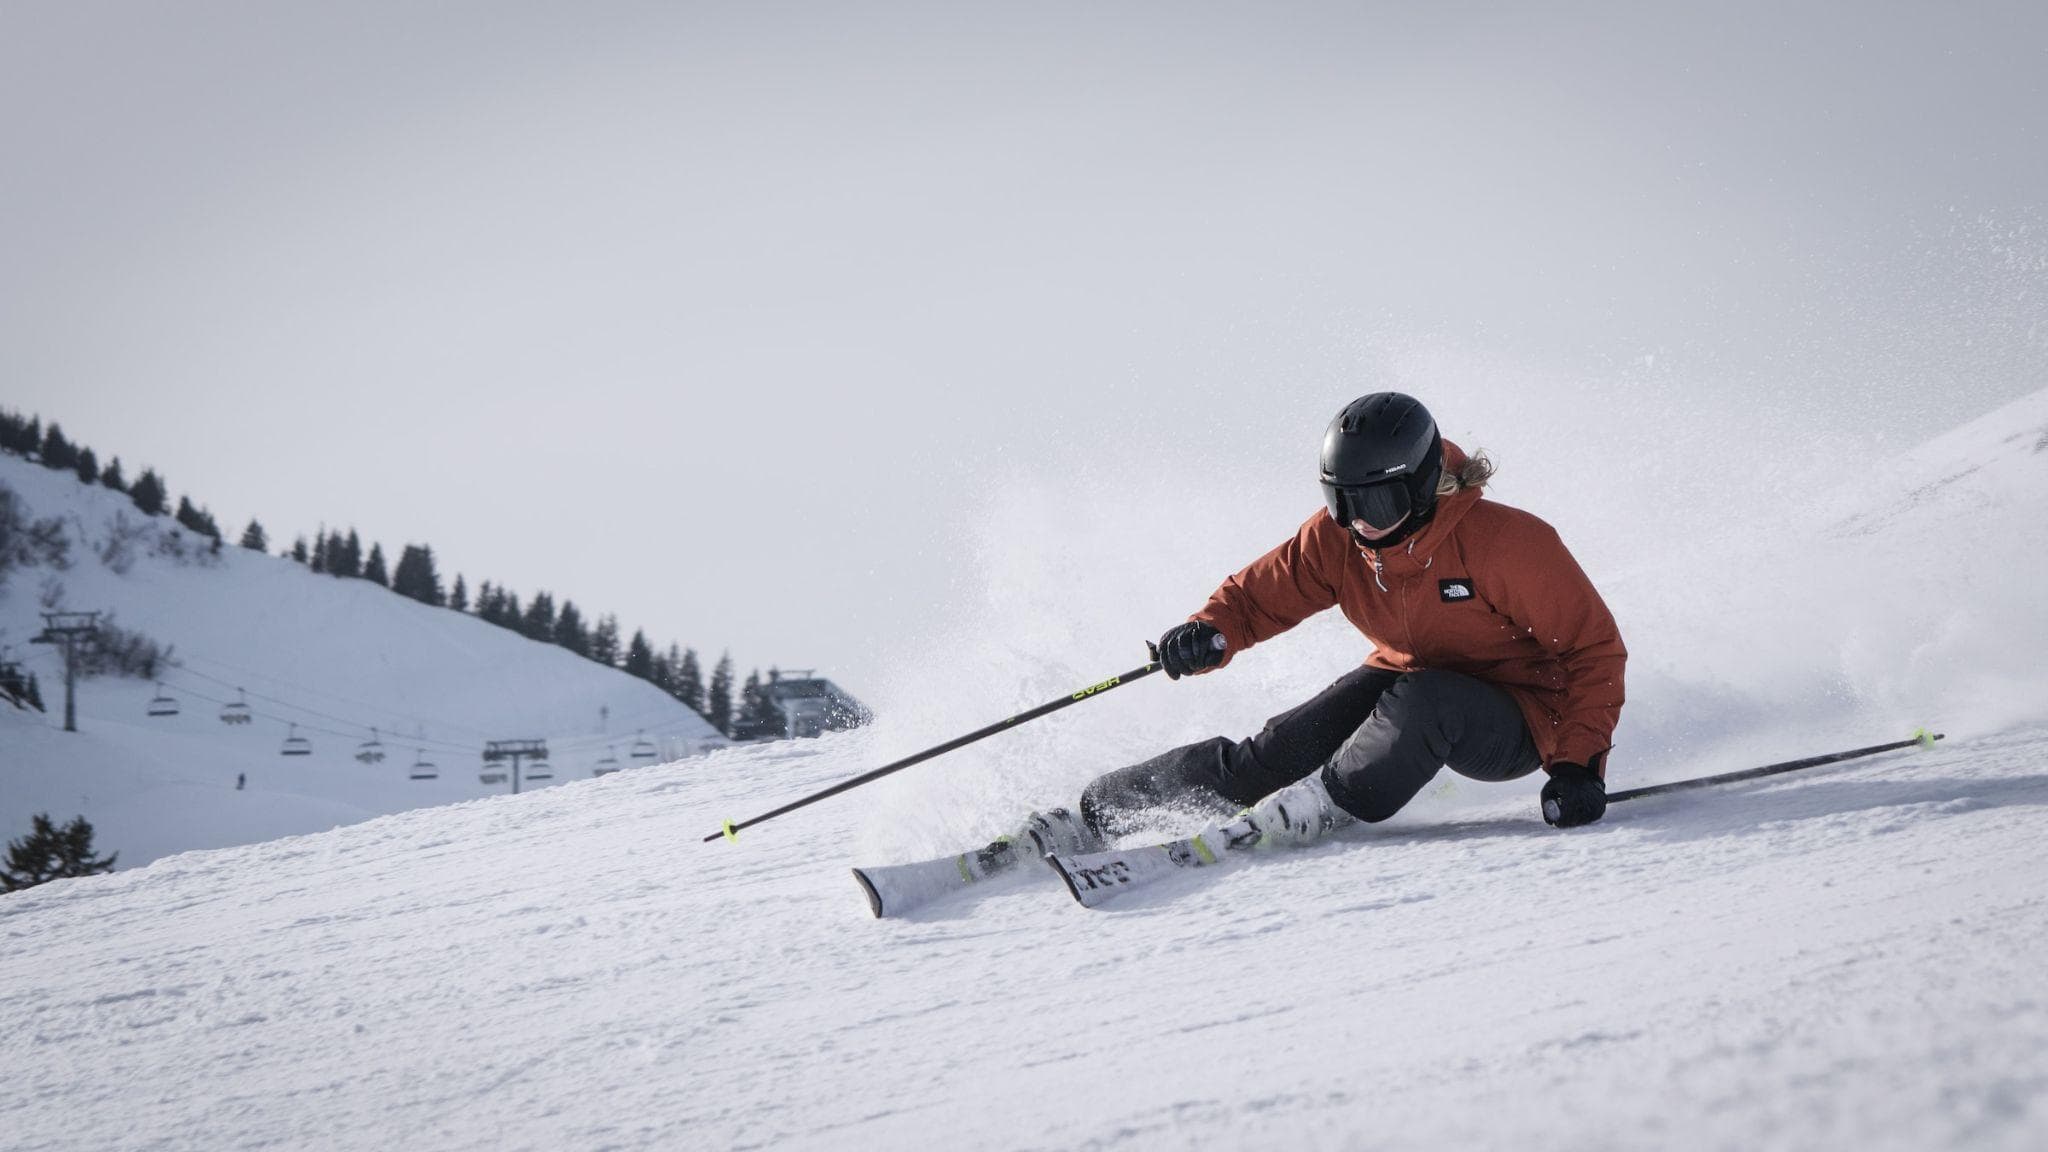 Winter Sports Injuries in Denver: Legal Recourse and Ski Resort Liability